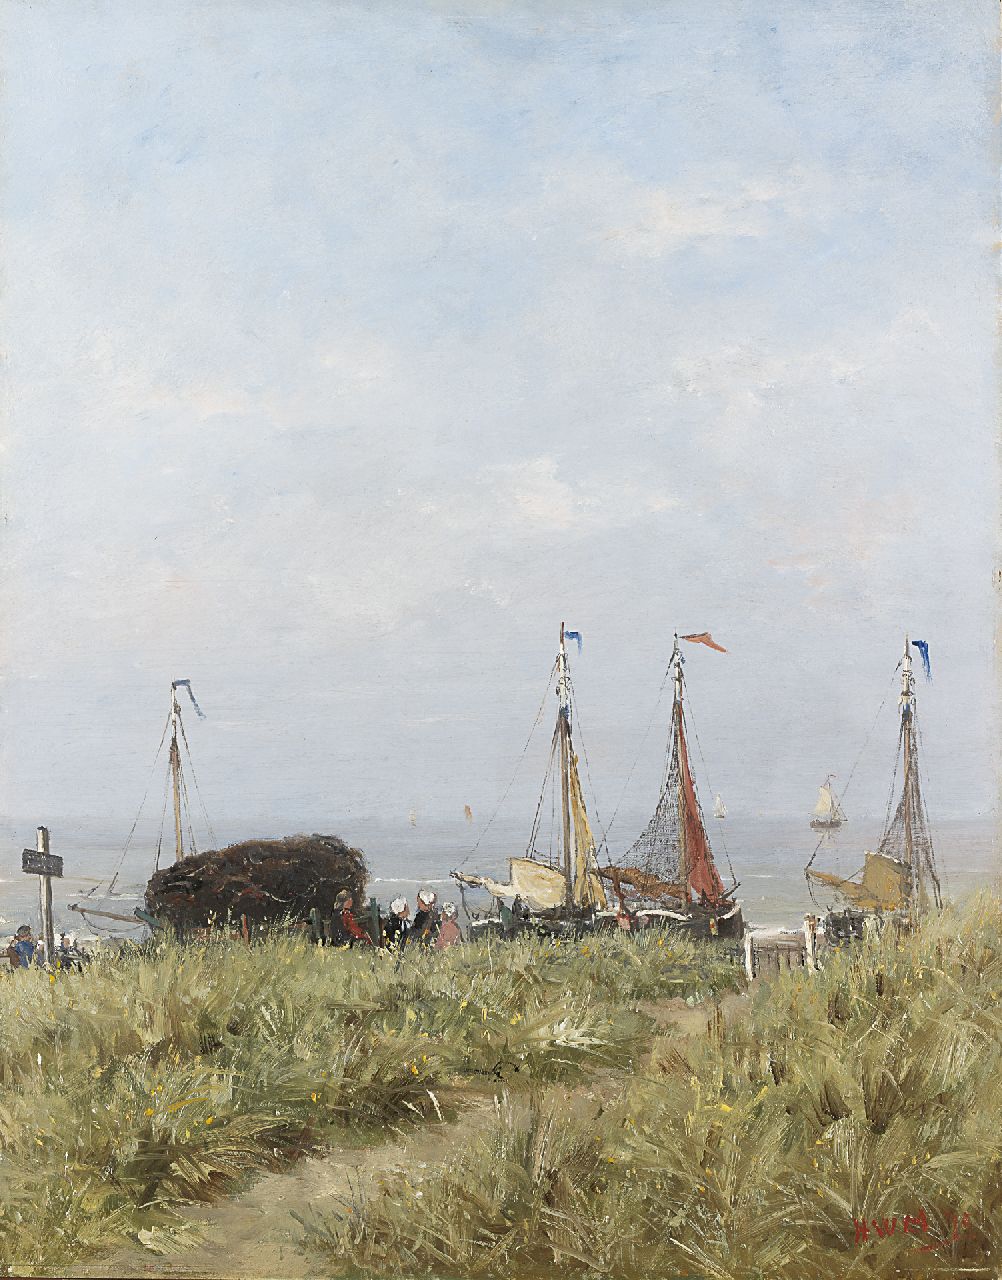 Mesdag H.W.  | Hendrik Willem Mesdag, Fisherfolk and 'bomschuiten' behind the dunes, oil on panel 50.5 x 39.5 cm, signed l.r. with initials and dated '75